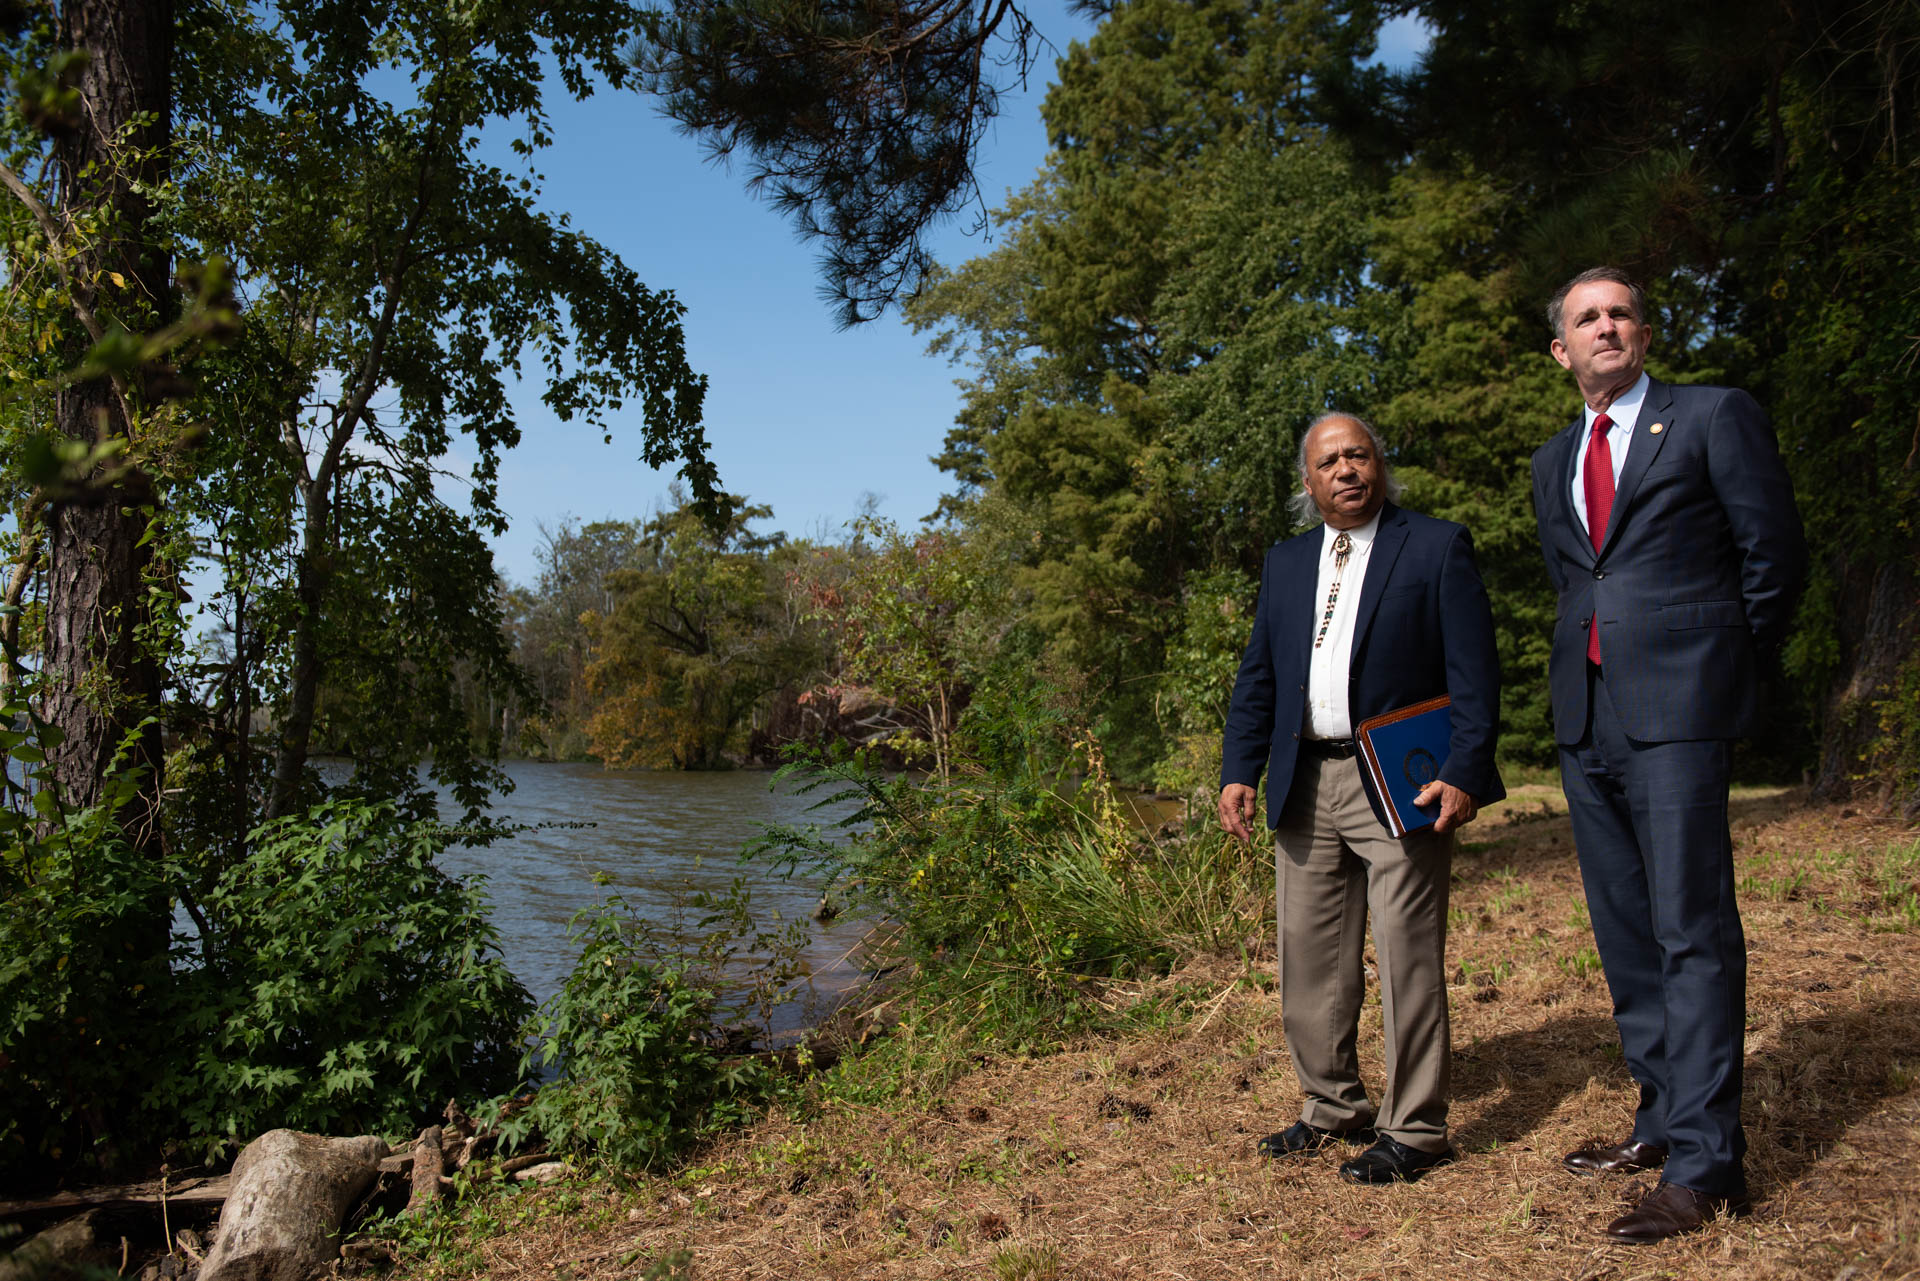 Chickahominy Tribe celebrates acquisition of ancestral land in Charles City